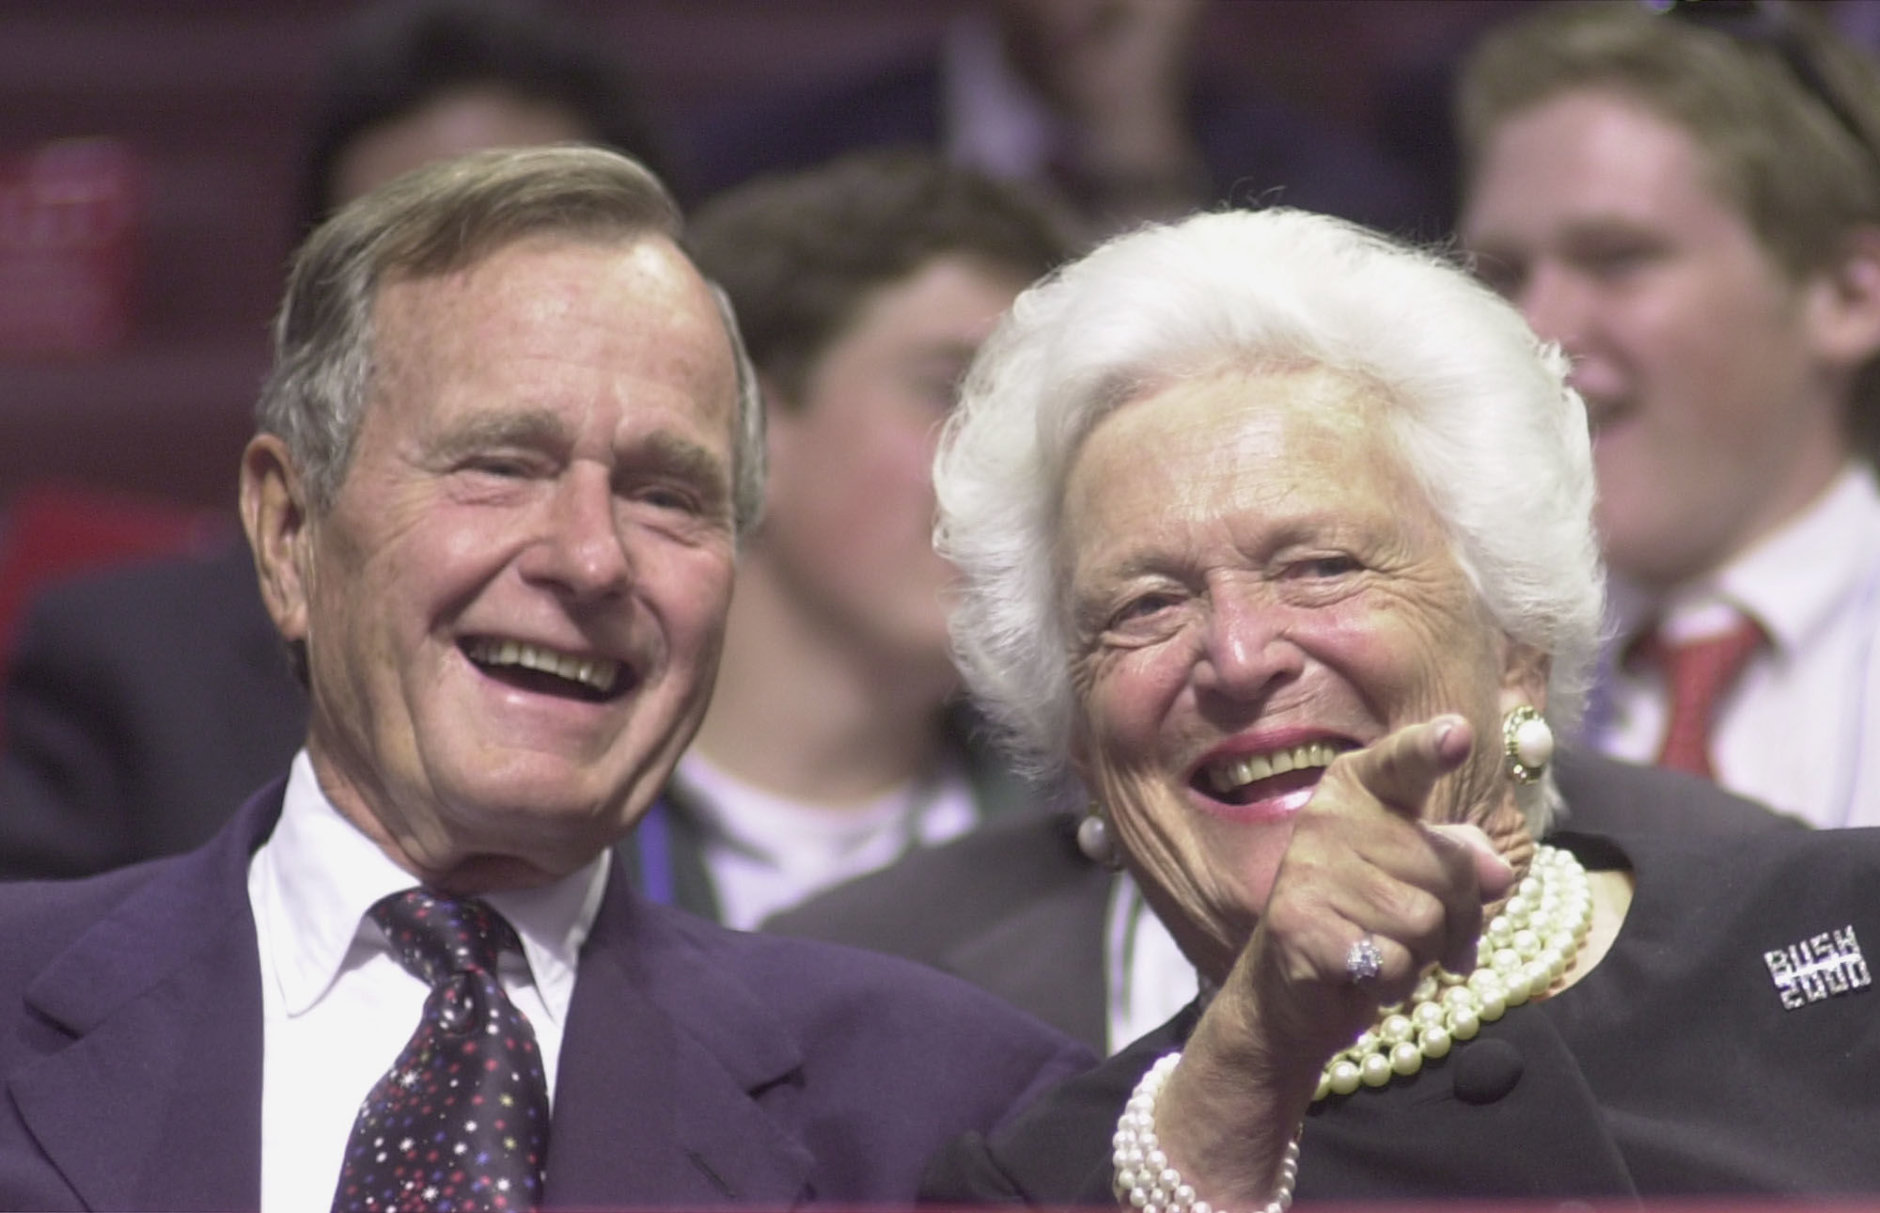 374784 02: ,George and Barbara Bush point to well-wishers during the first day of the Republican National Convention, July 31, 2000 in Philadelphia. (Photo by Chris Hondros/Newsmakers)